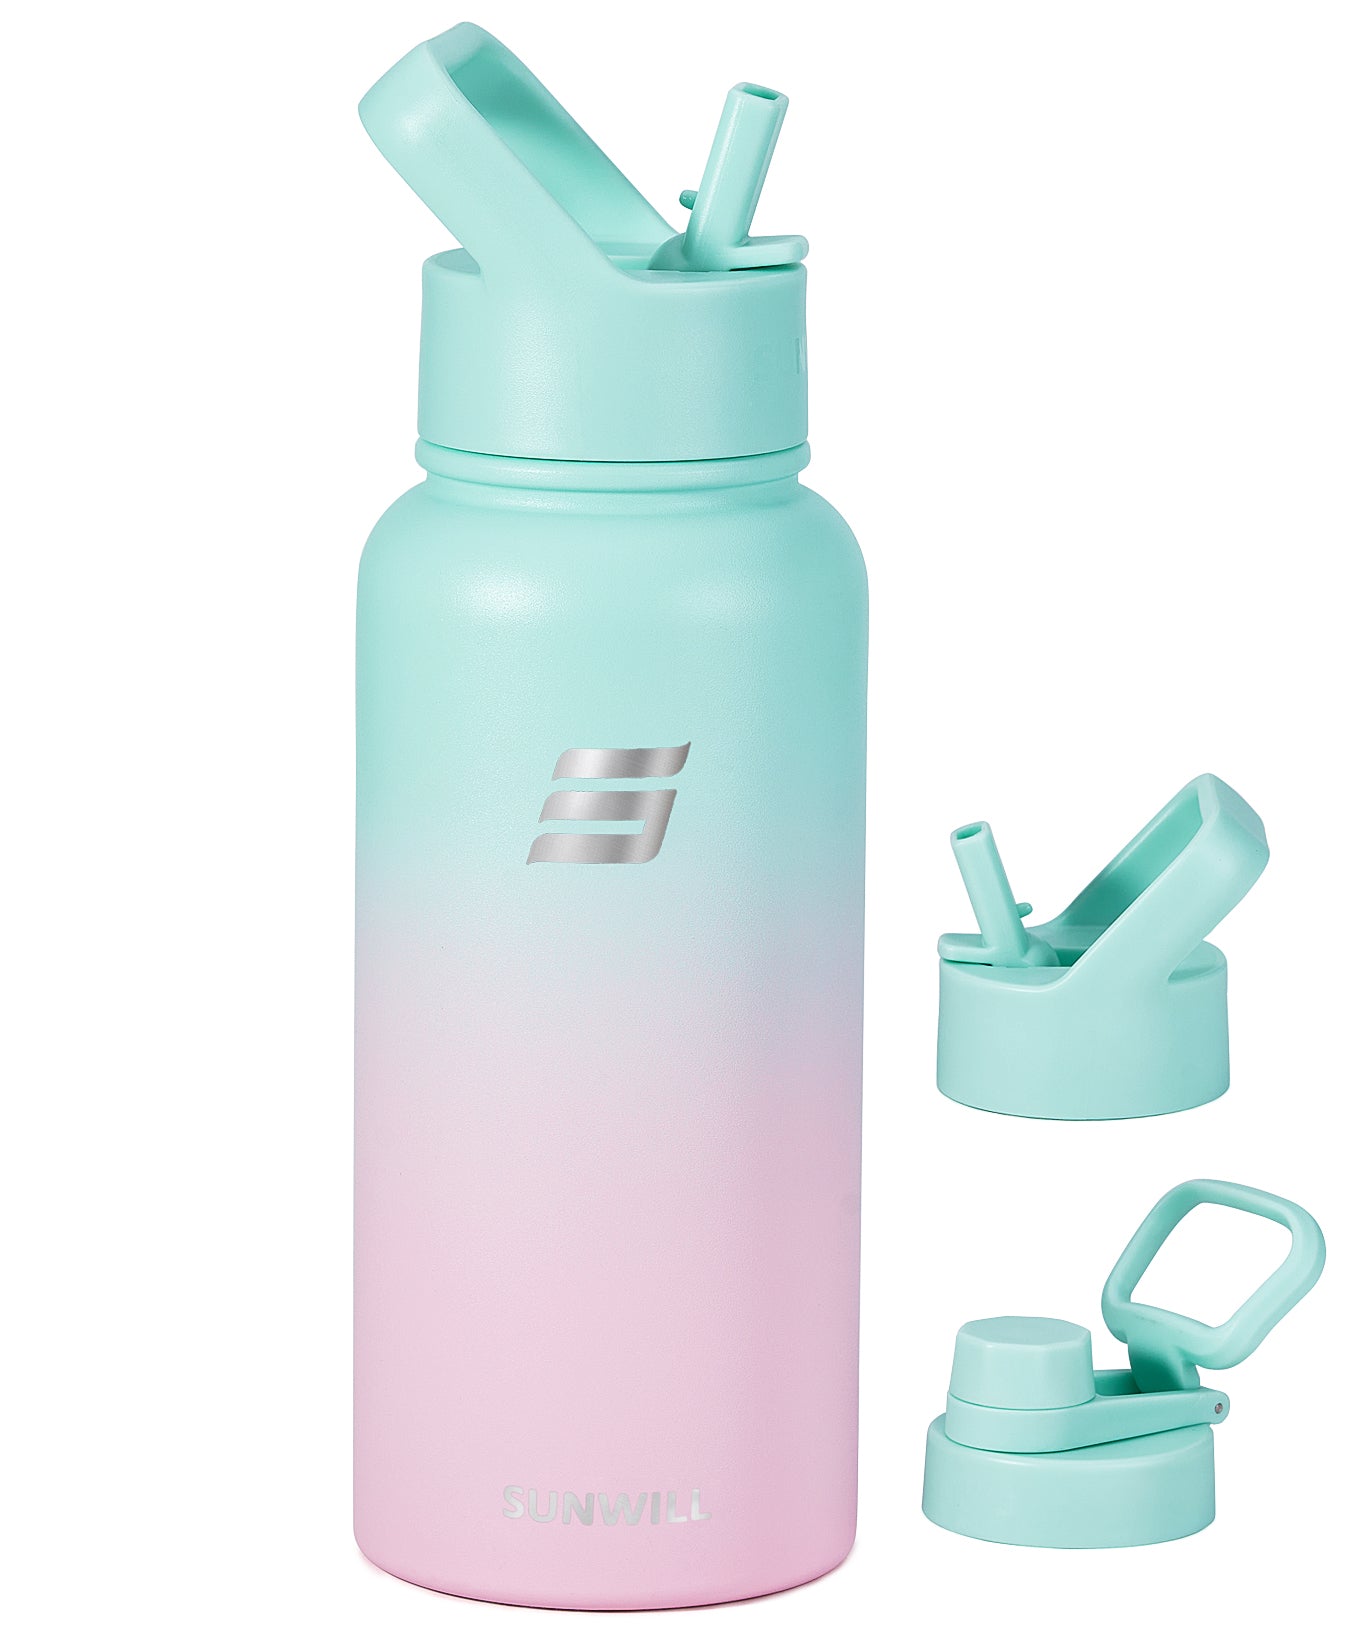 32oz Insulated Water Bottle with Straw - Powder Coated Gradiant Mint Sakura